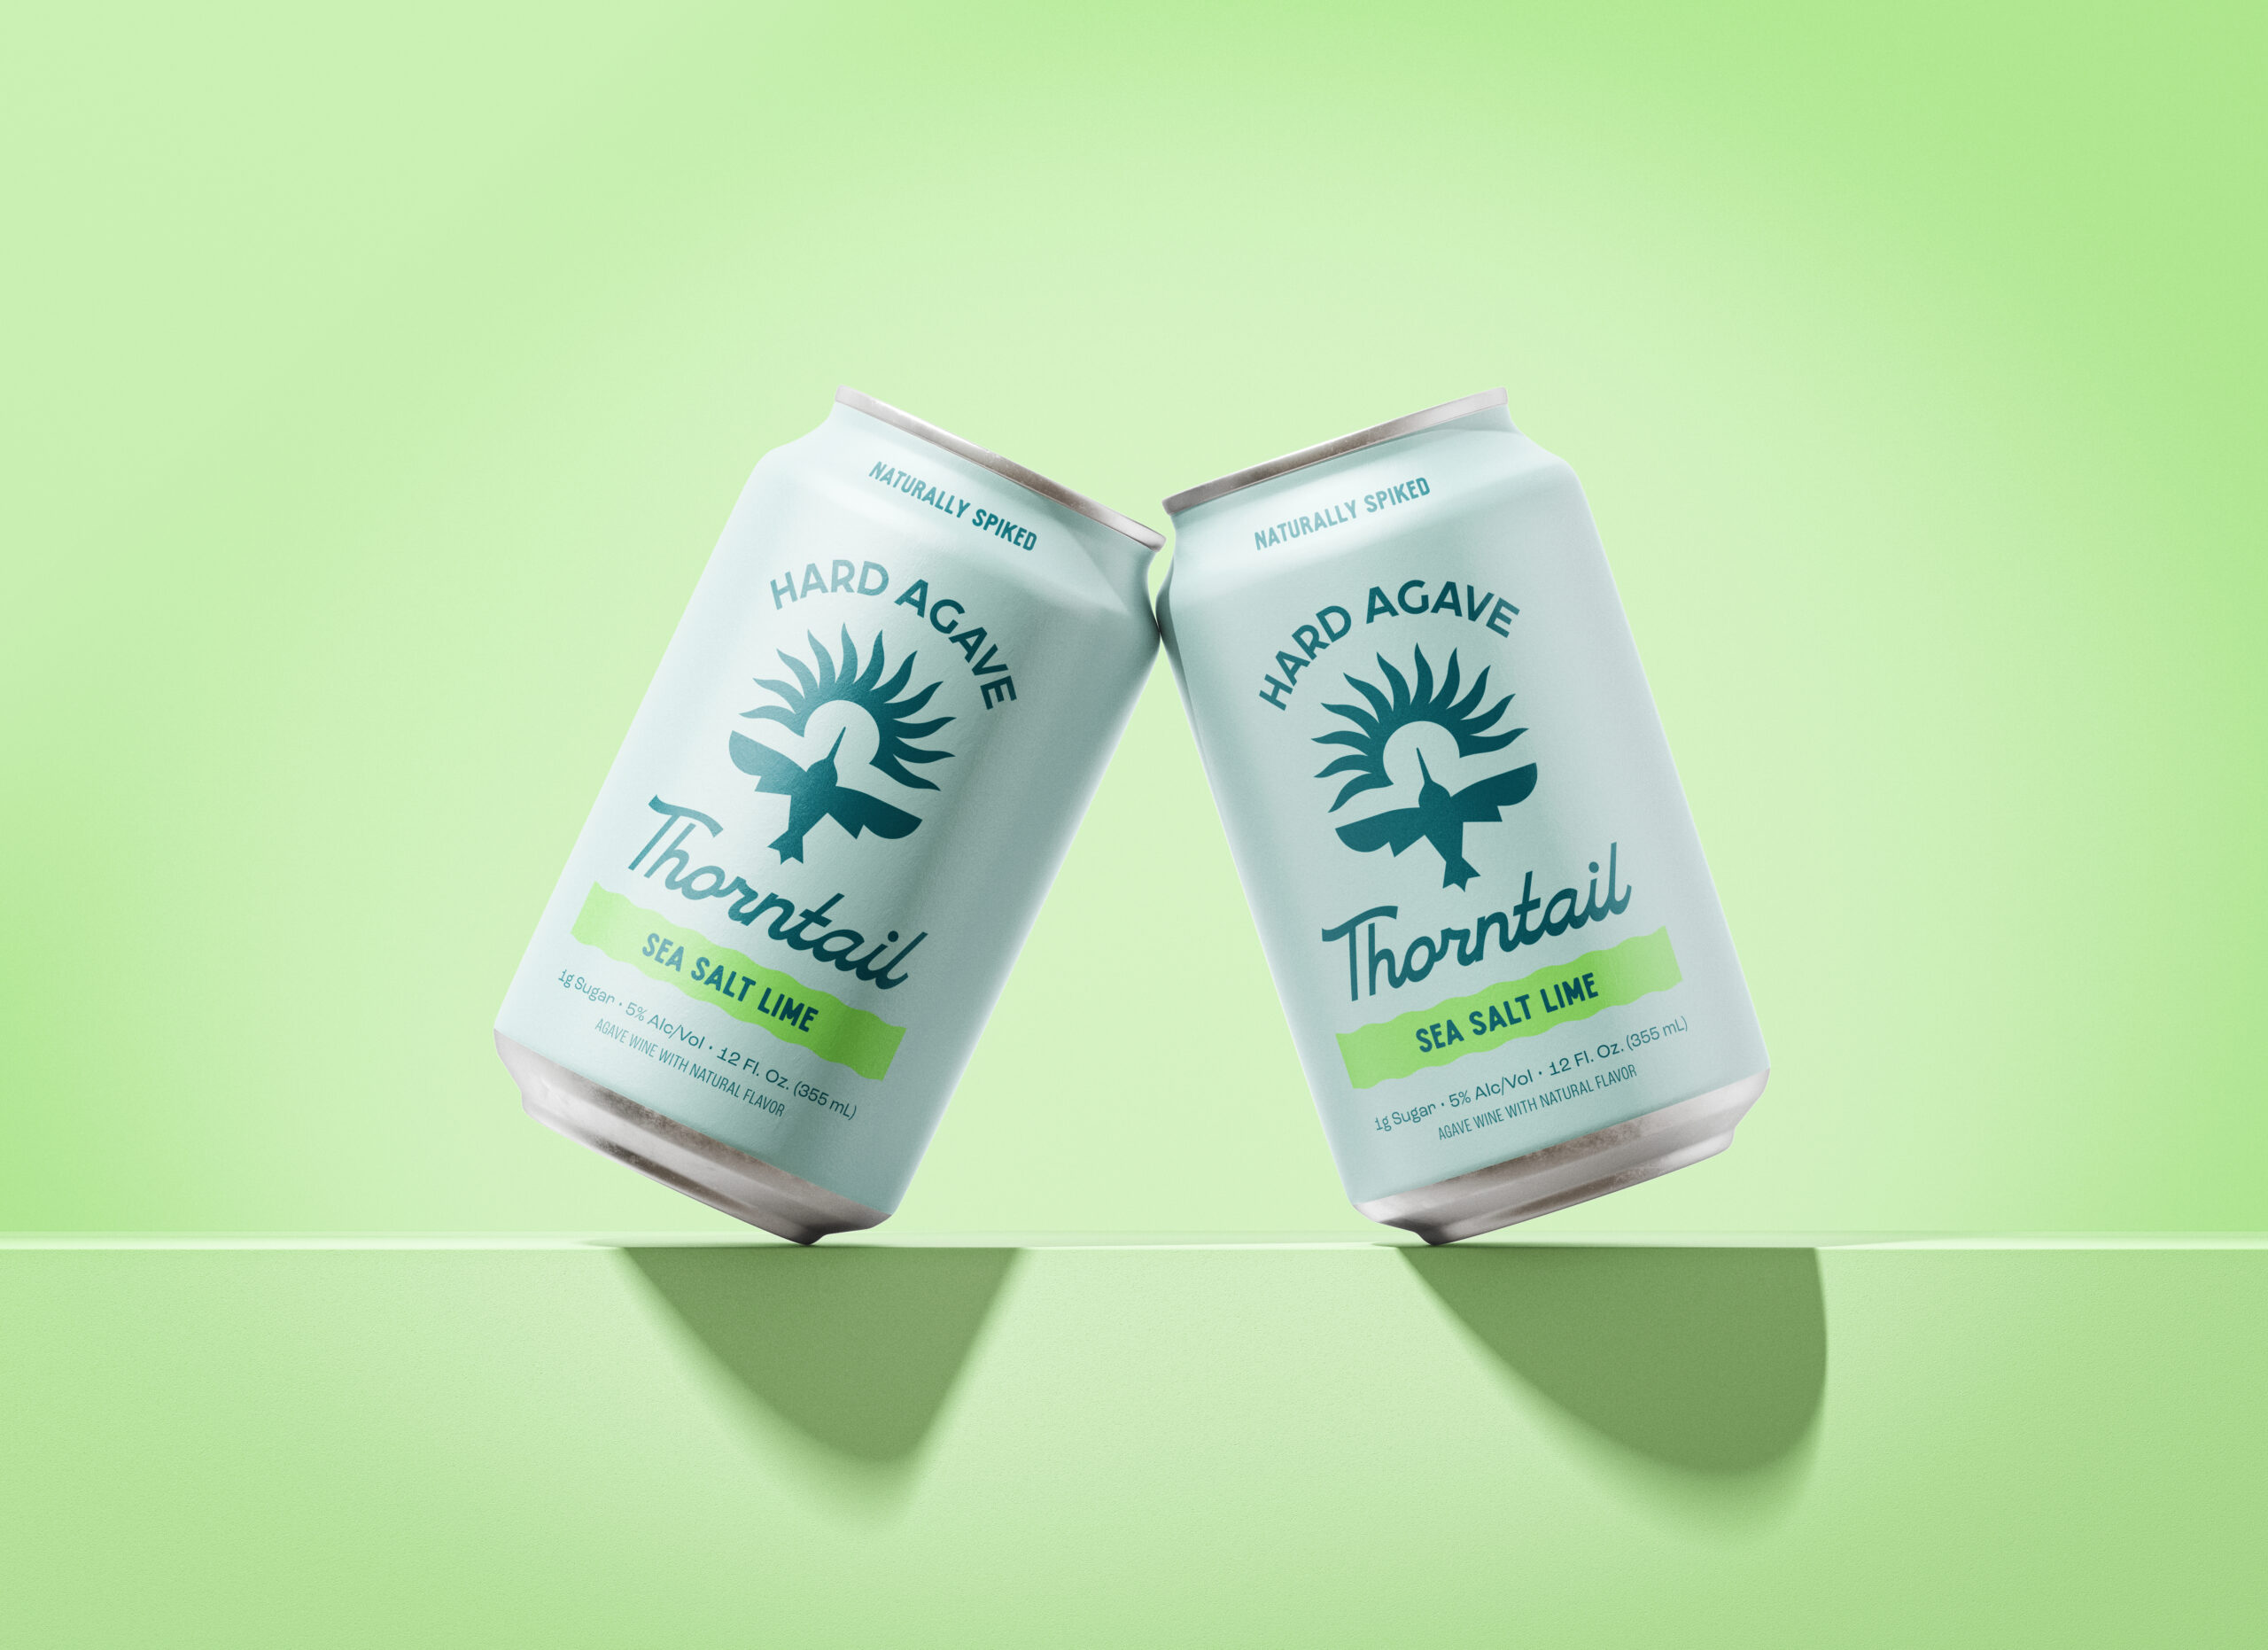 Introducing Thorntail's Hard Agave: A Unique Beverage Designed by People People